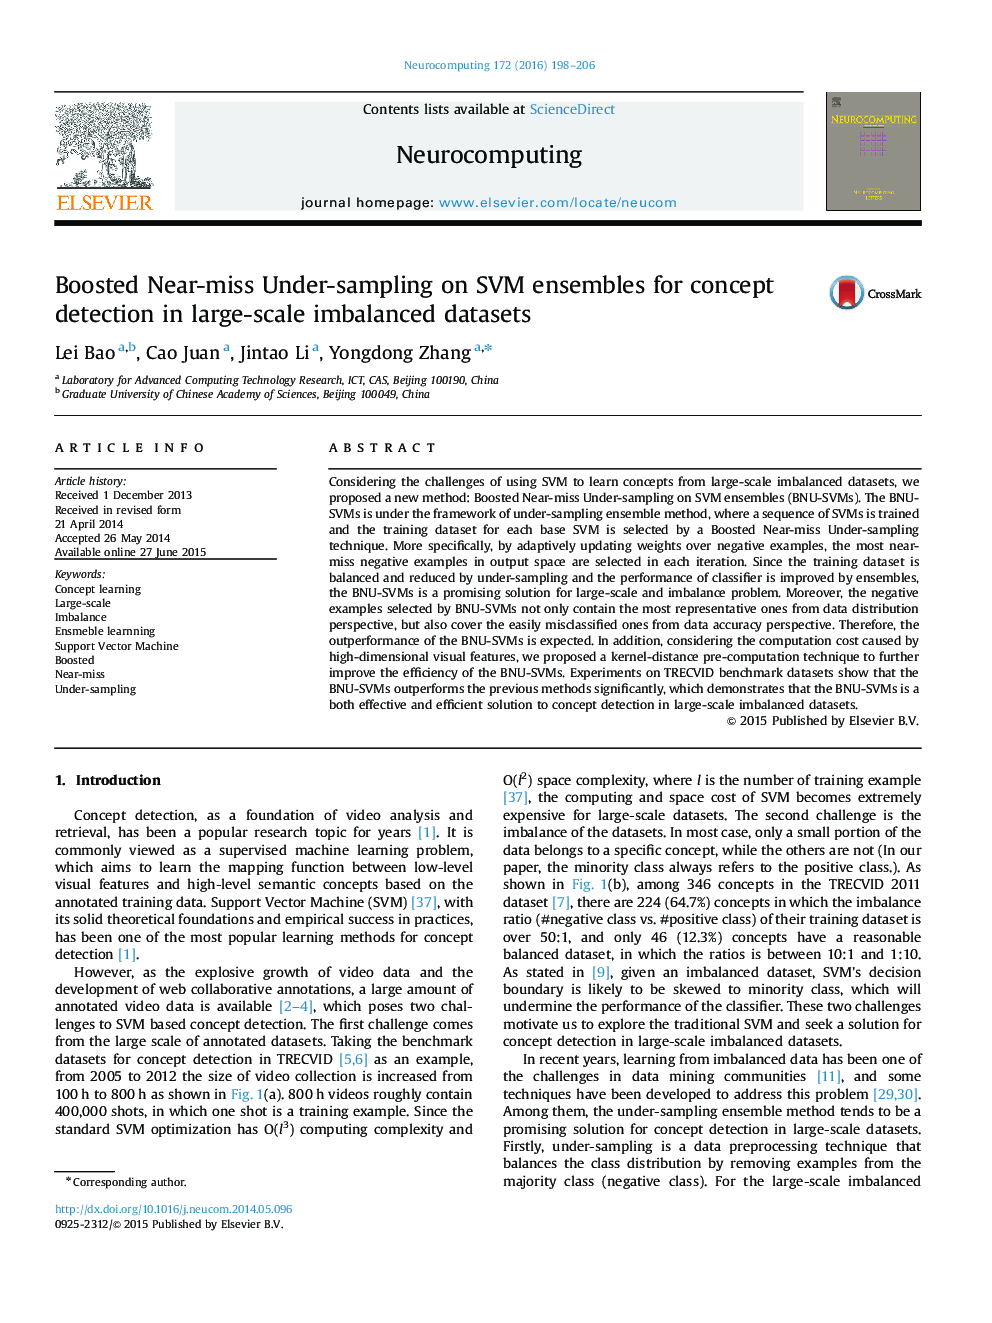 Boosted Near-miss Under-sampling on SVM ensembles for concept detection in large-scale imbalanced datasets